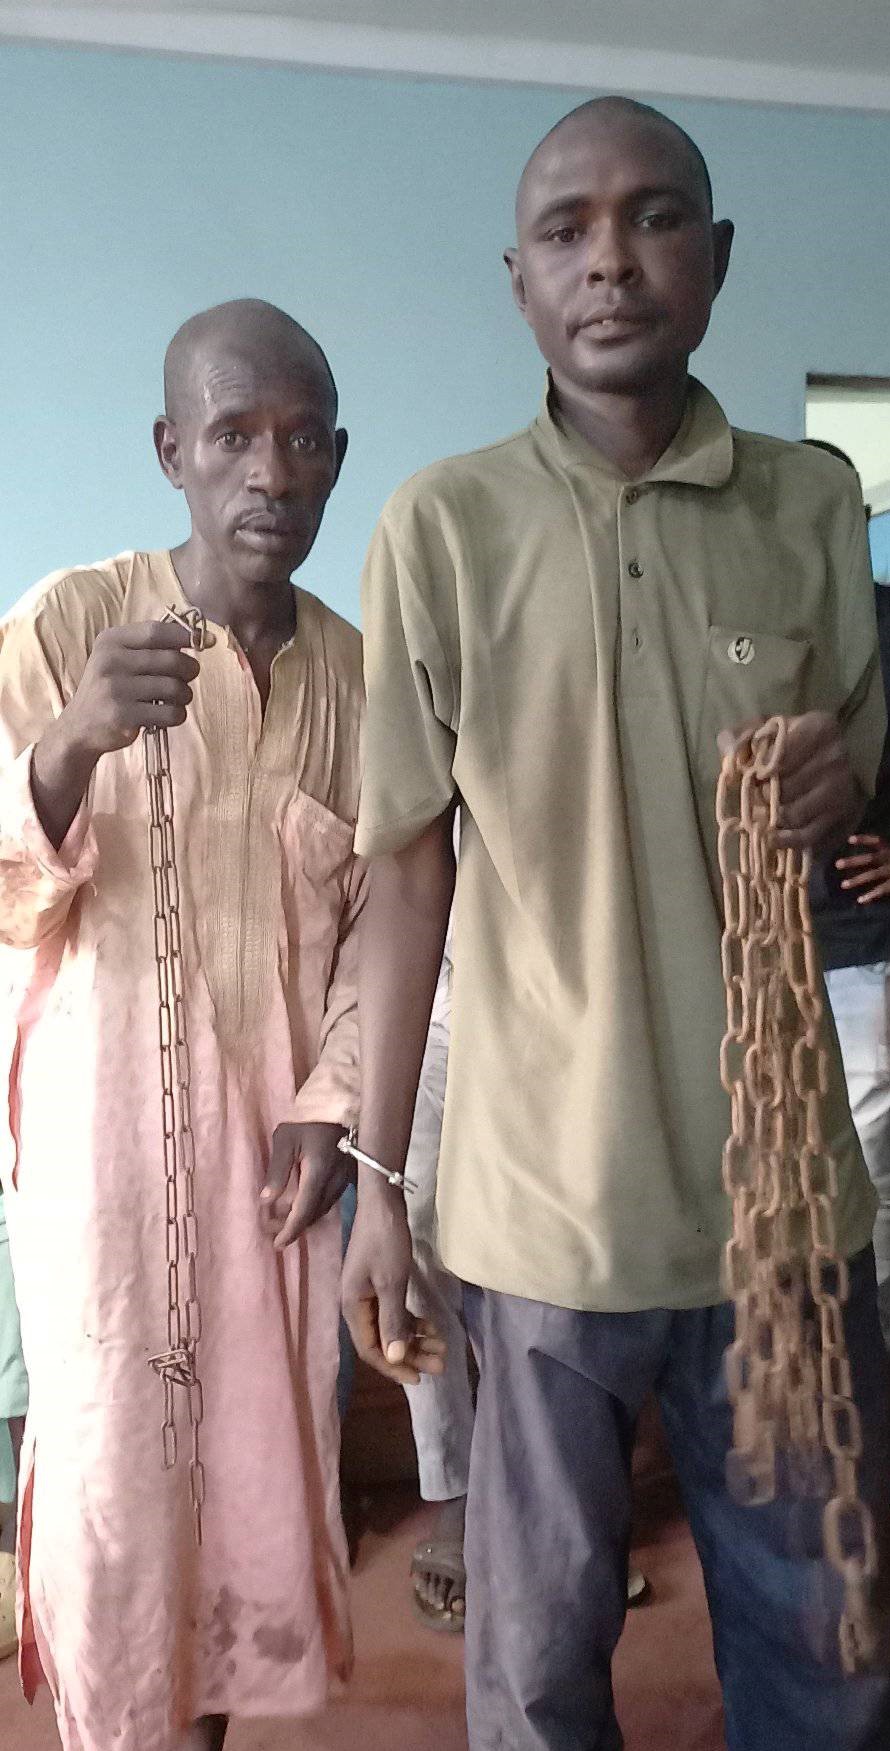 Yobe Police bust kidnap syndicate, arrest kingpin and rescue victim 